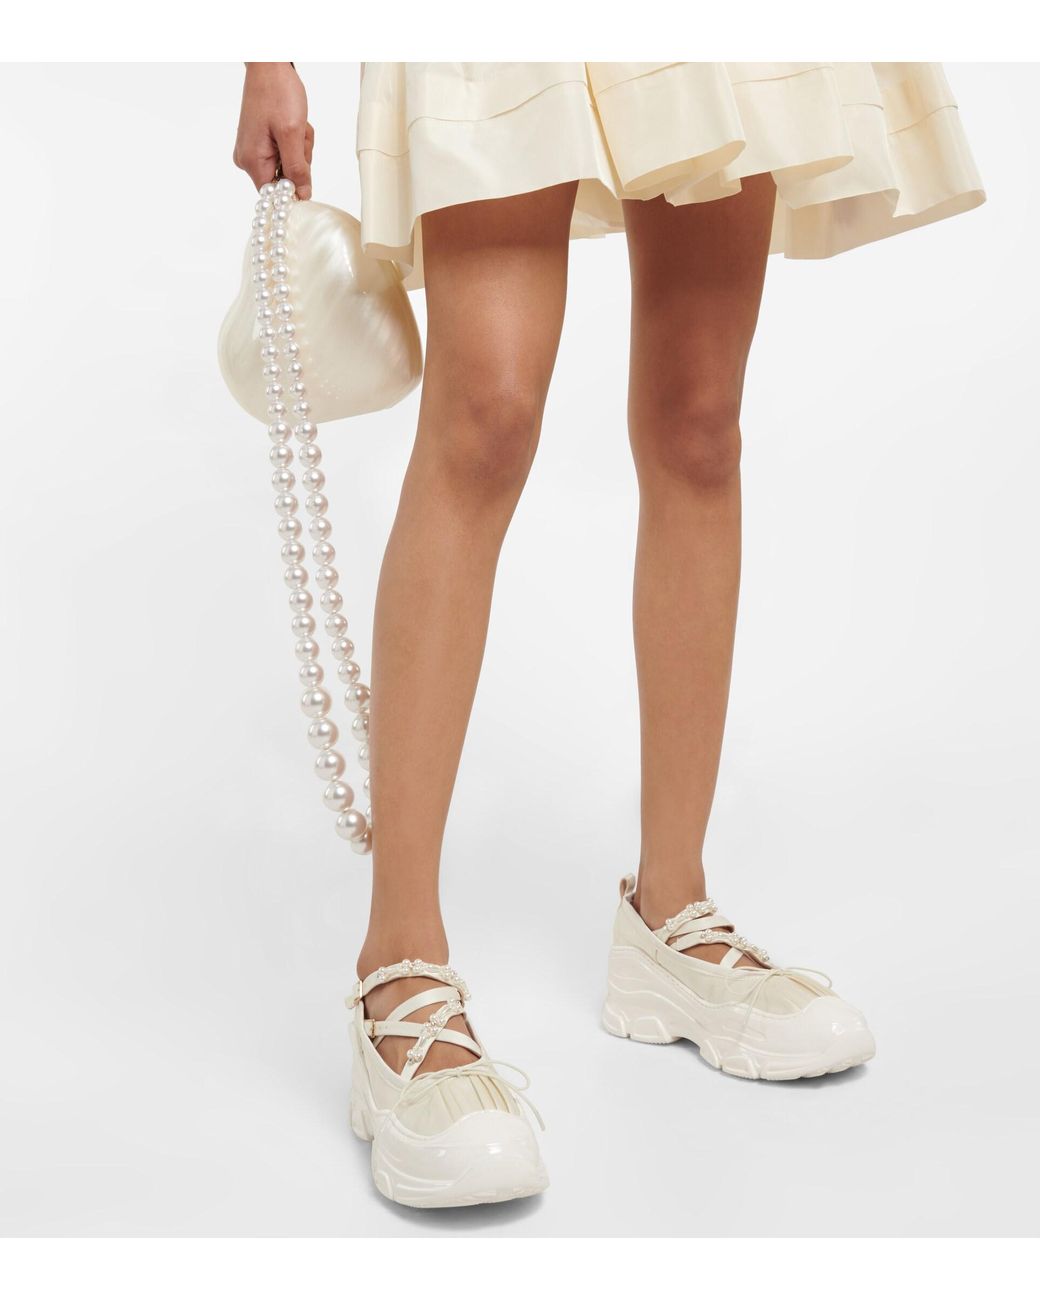 Simone Rocha Embellished Sneakers in White | Lyst